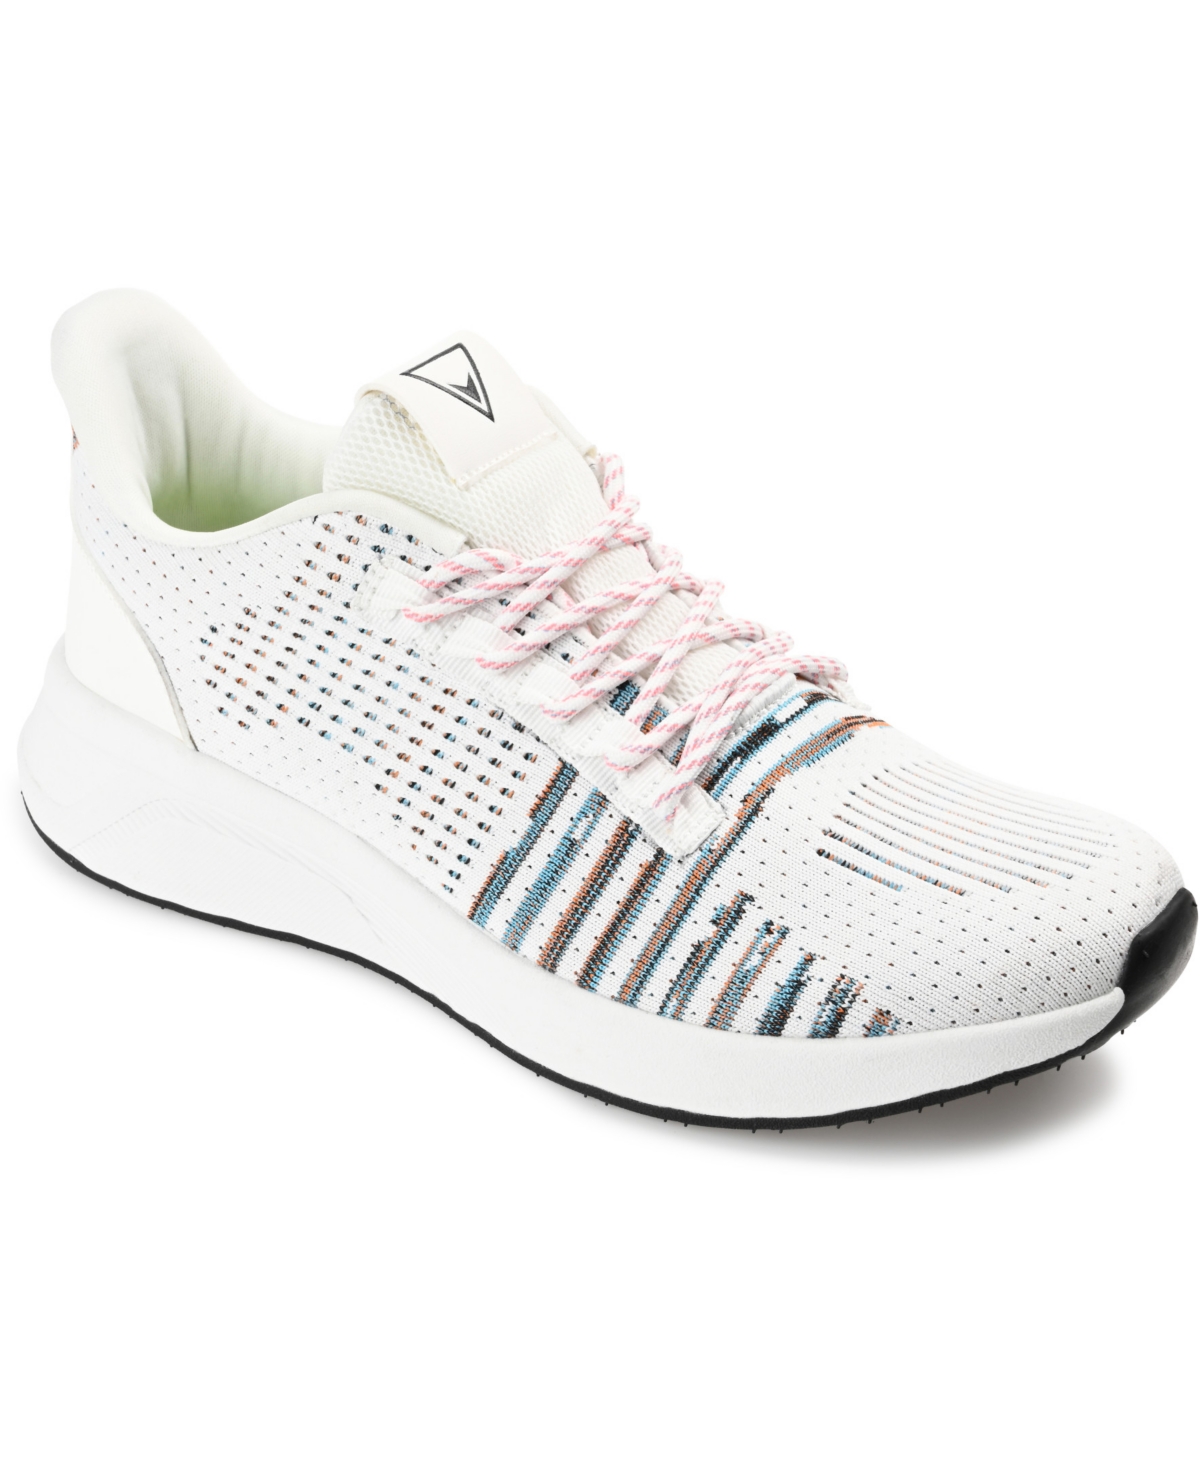 Men's Brewer Knit Athleisure Sneakers - White